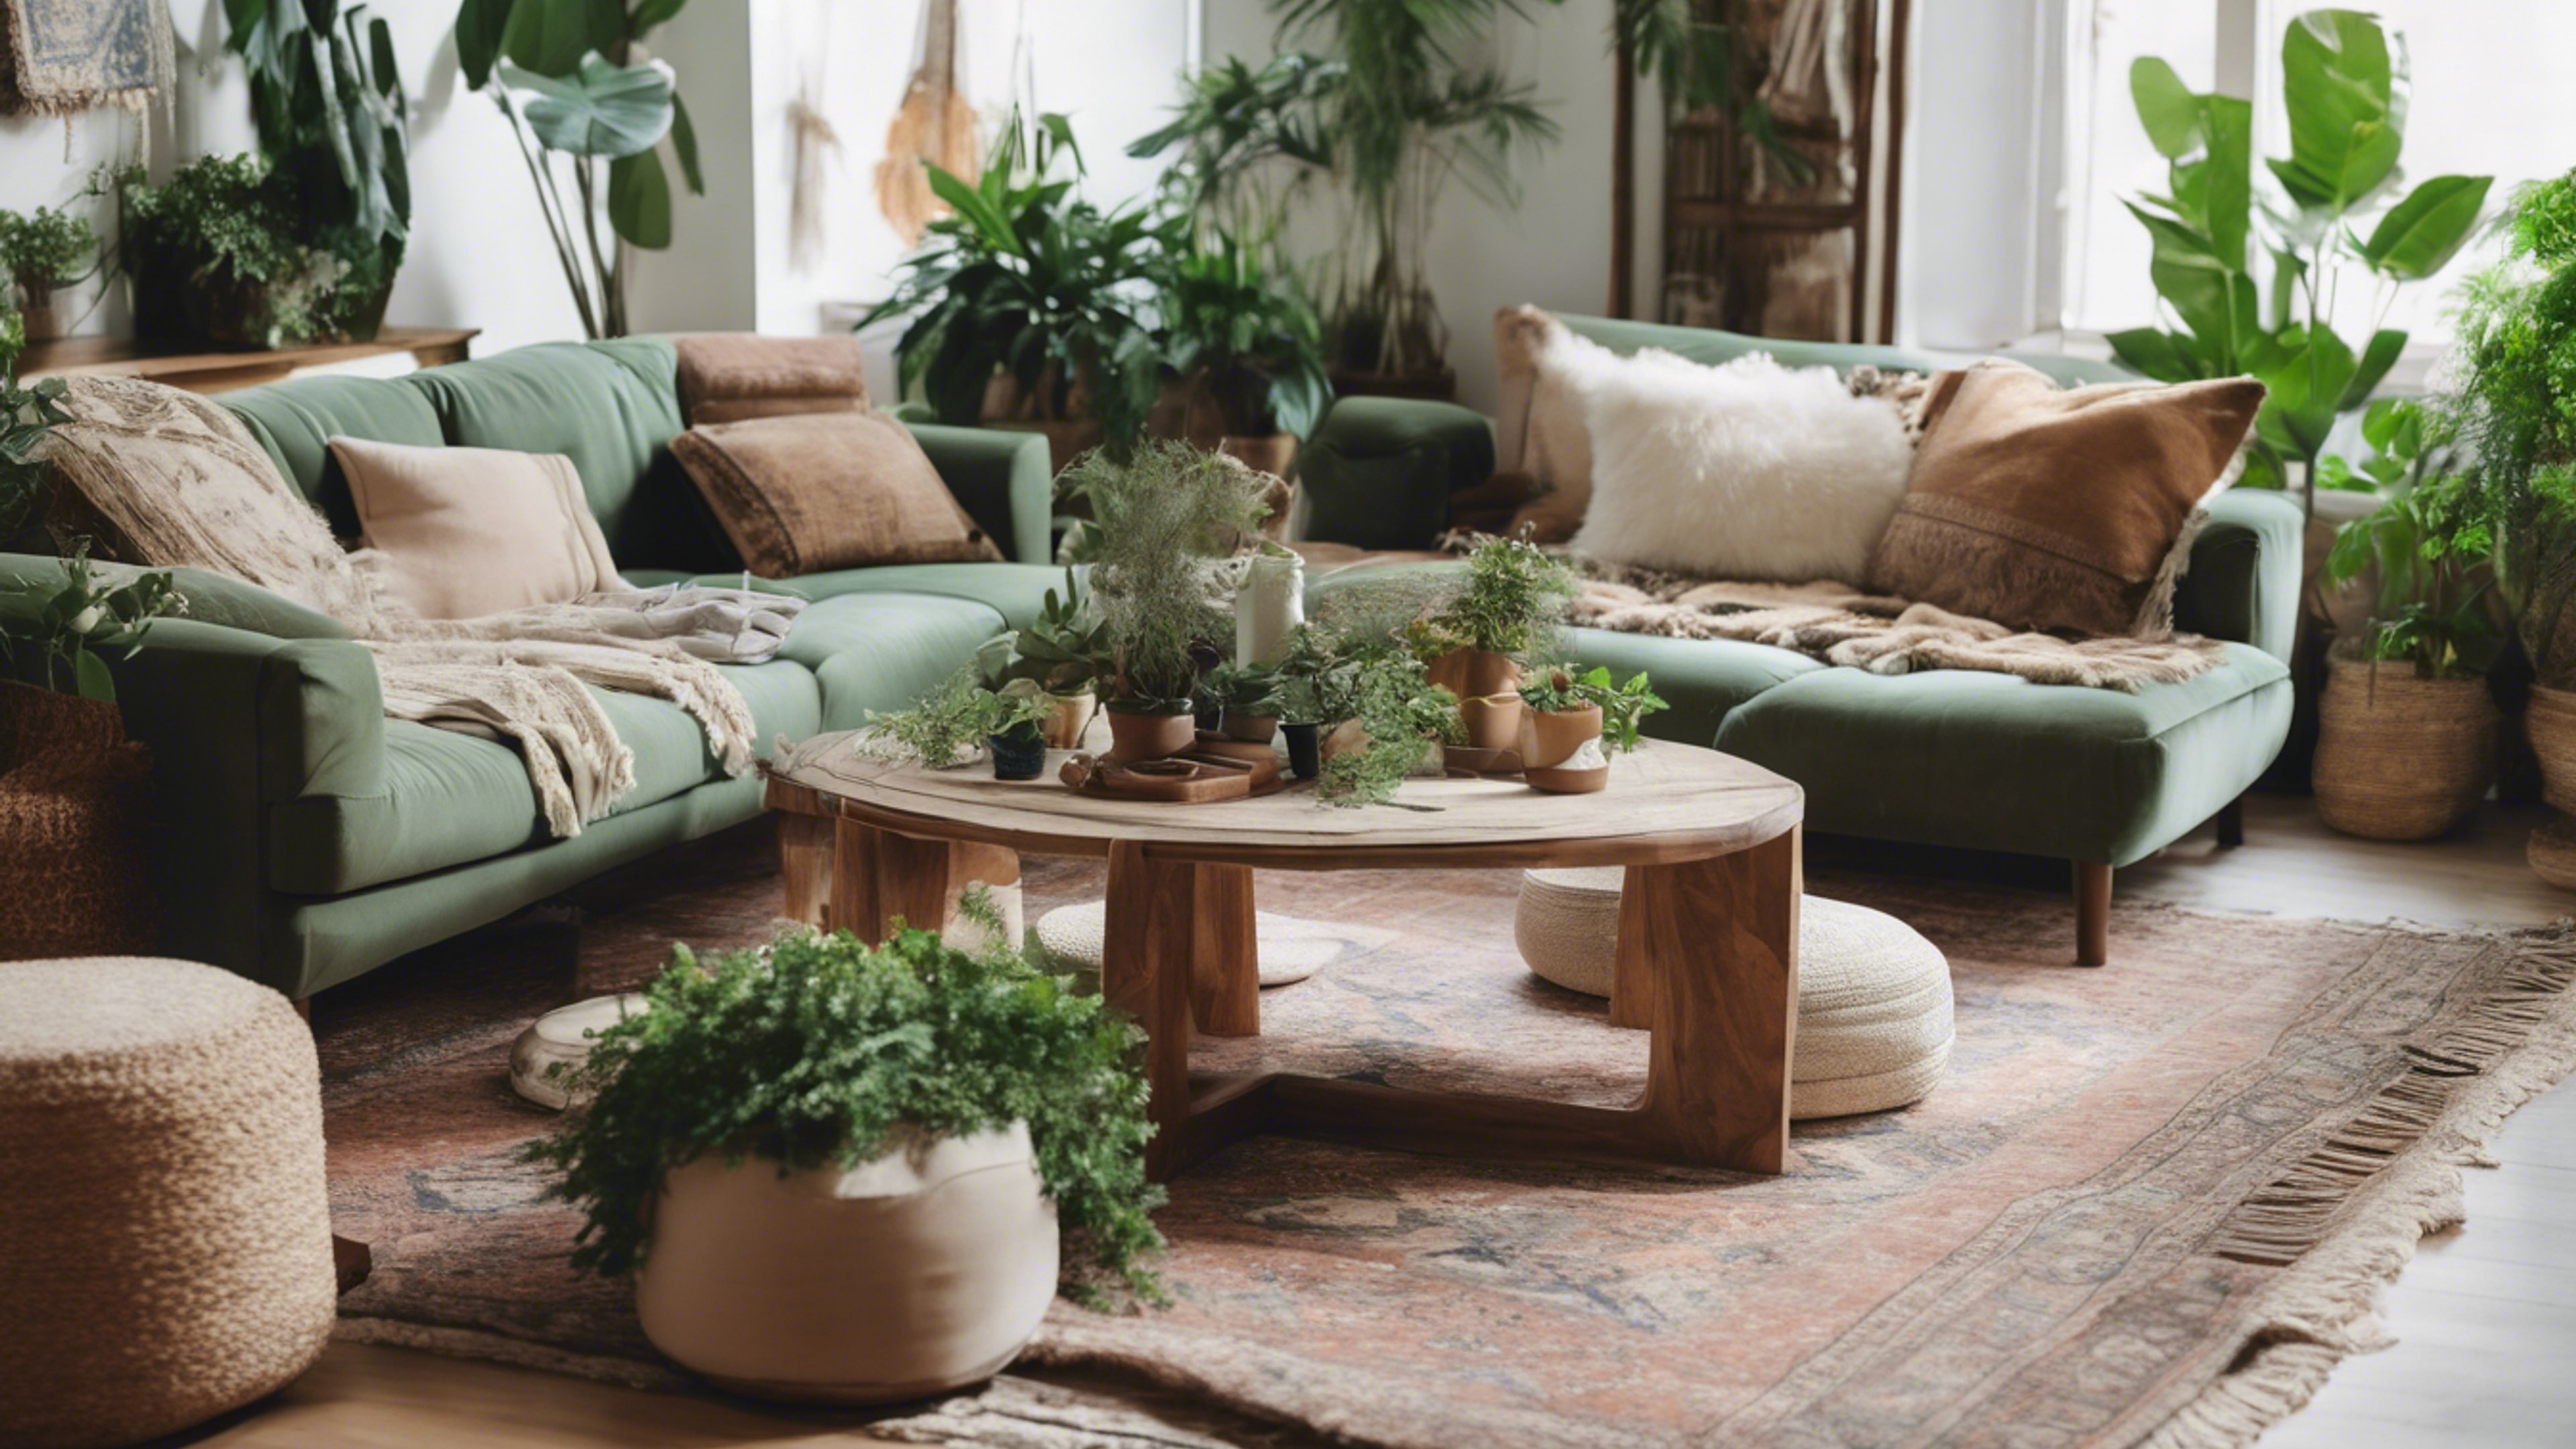 An inviting boho living room with a neutral color palette, featuring a floor seating arrangement, a lot of green plants, and a large Persian rug.壁紙[3b2820ebc0844567949f]